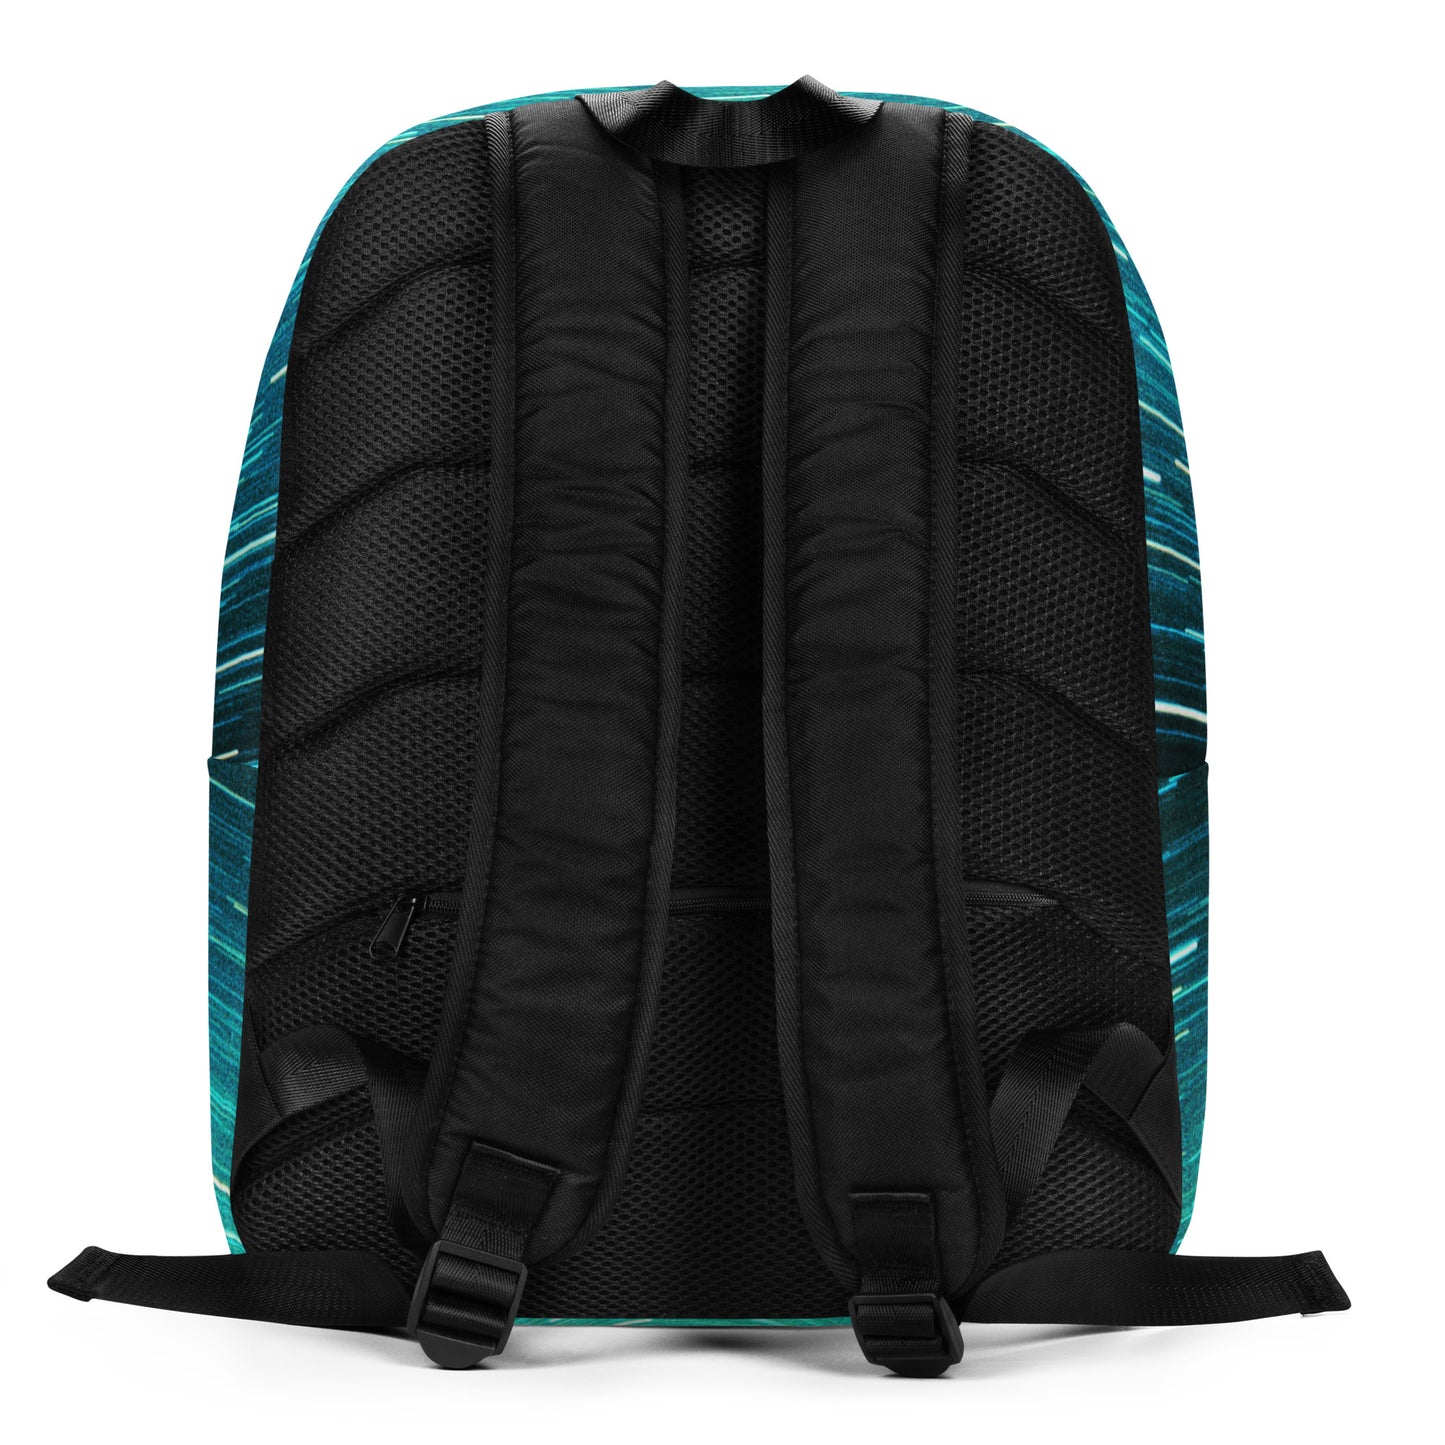 T-Rex  in Gold in Turquoise Minimalist Backpack